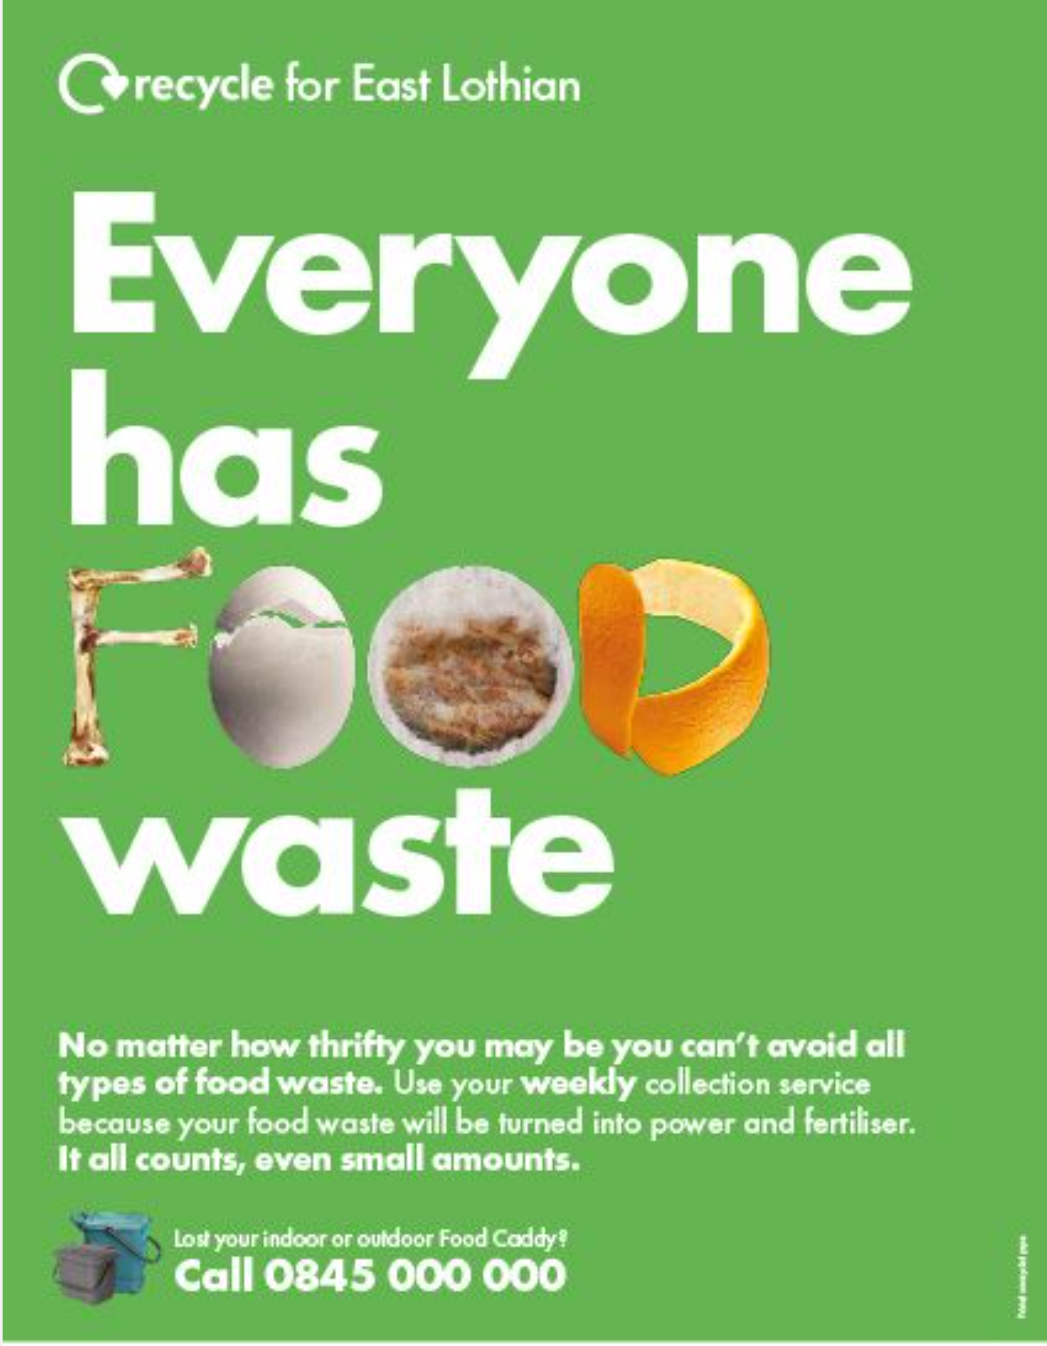 Recycle for Scotland local authority Everyone has Food Waste A3 poster